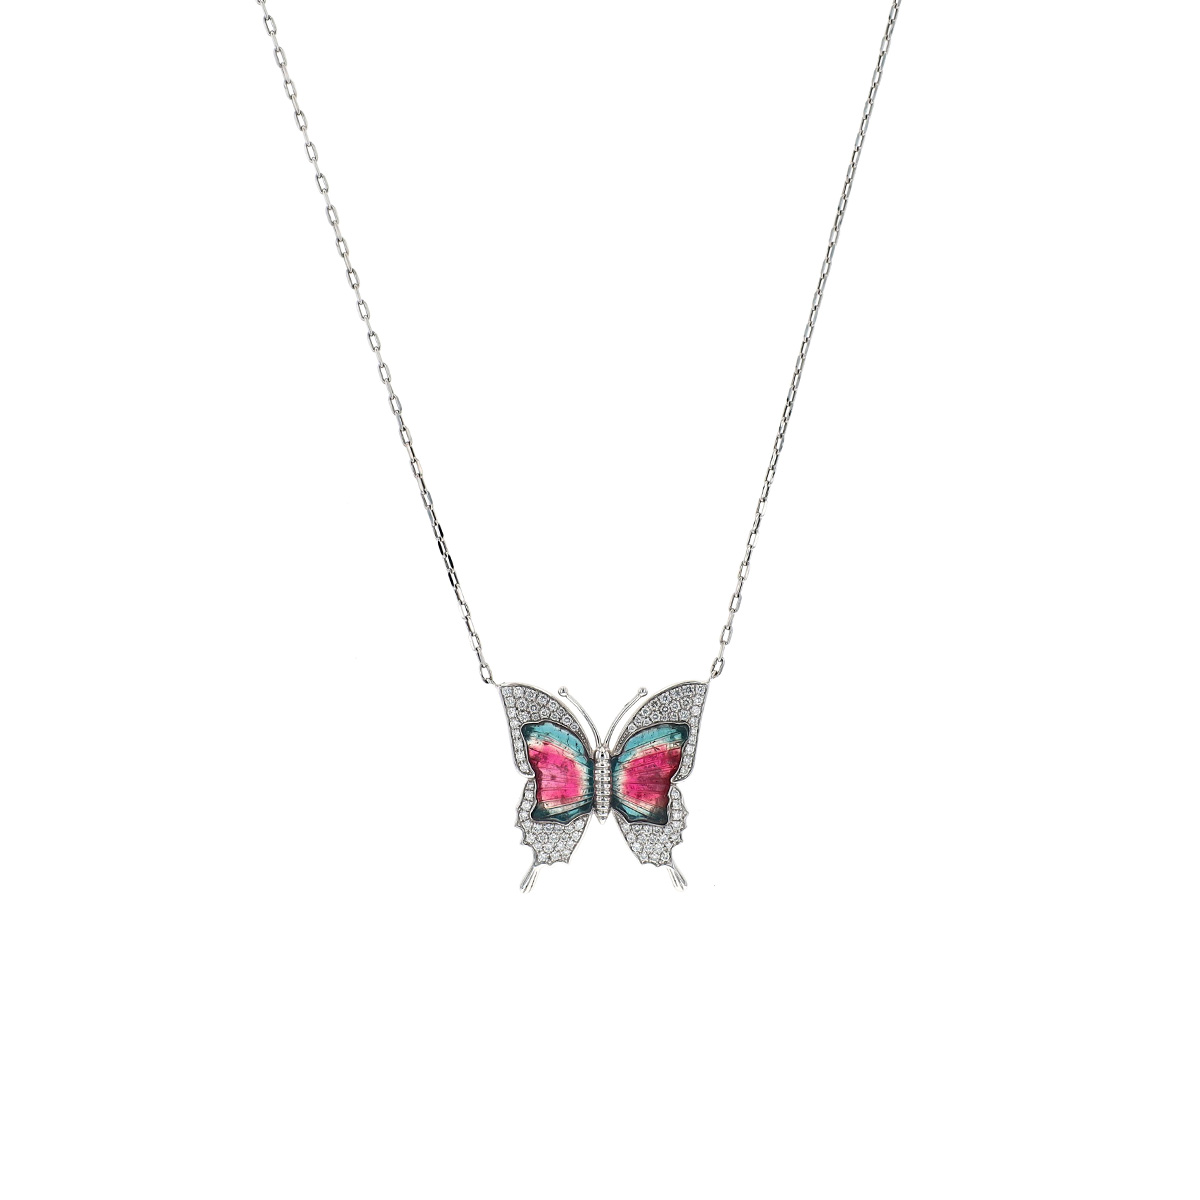 14K White Gold Tourmaline and Diamond Butterfly Necklace